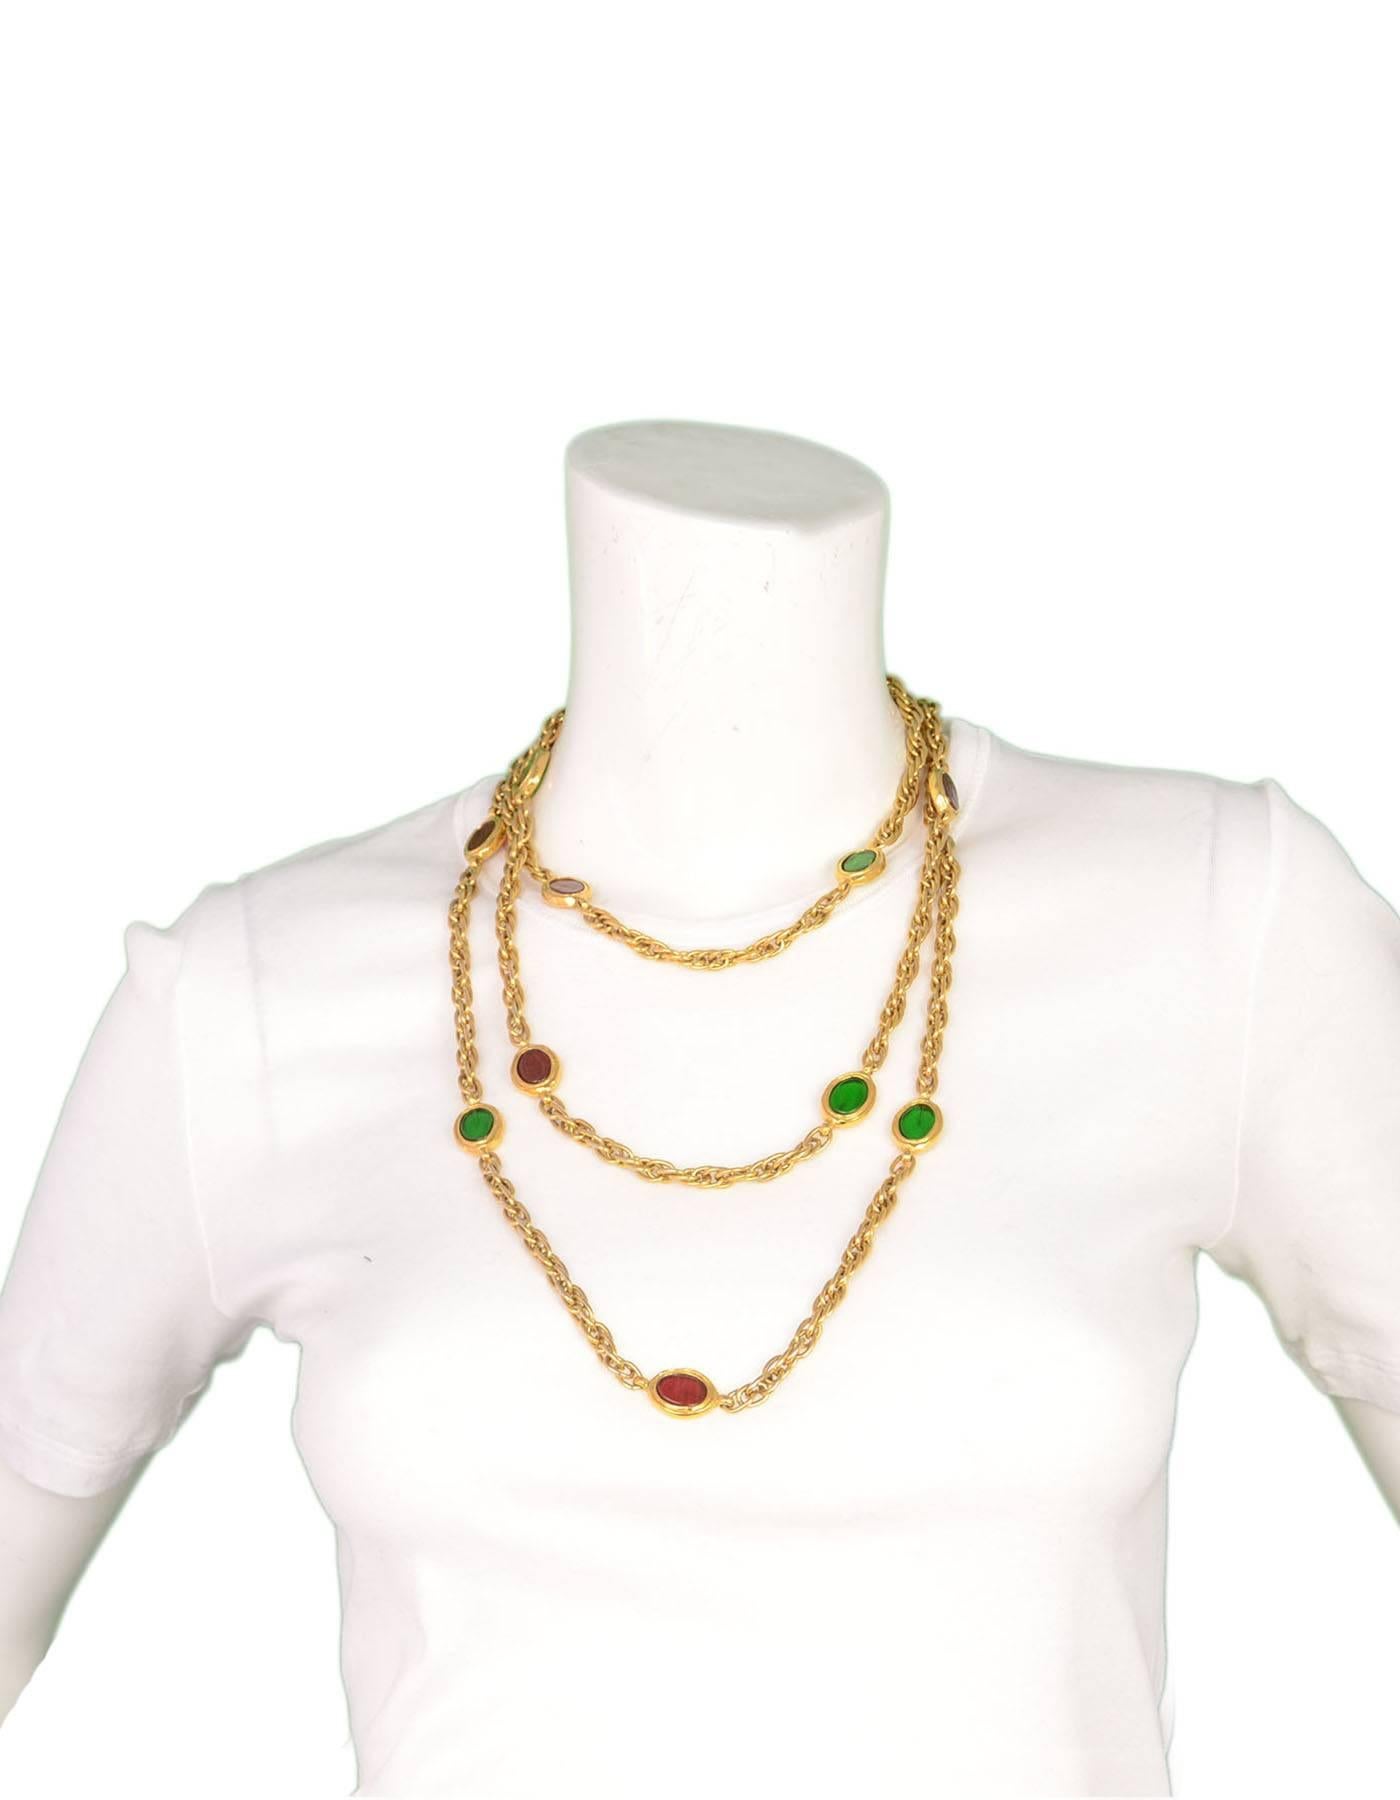 CHANEL Vintage '70s-'80s Red & Green Gripoix Gold Necklace 1